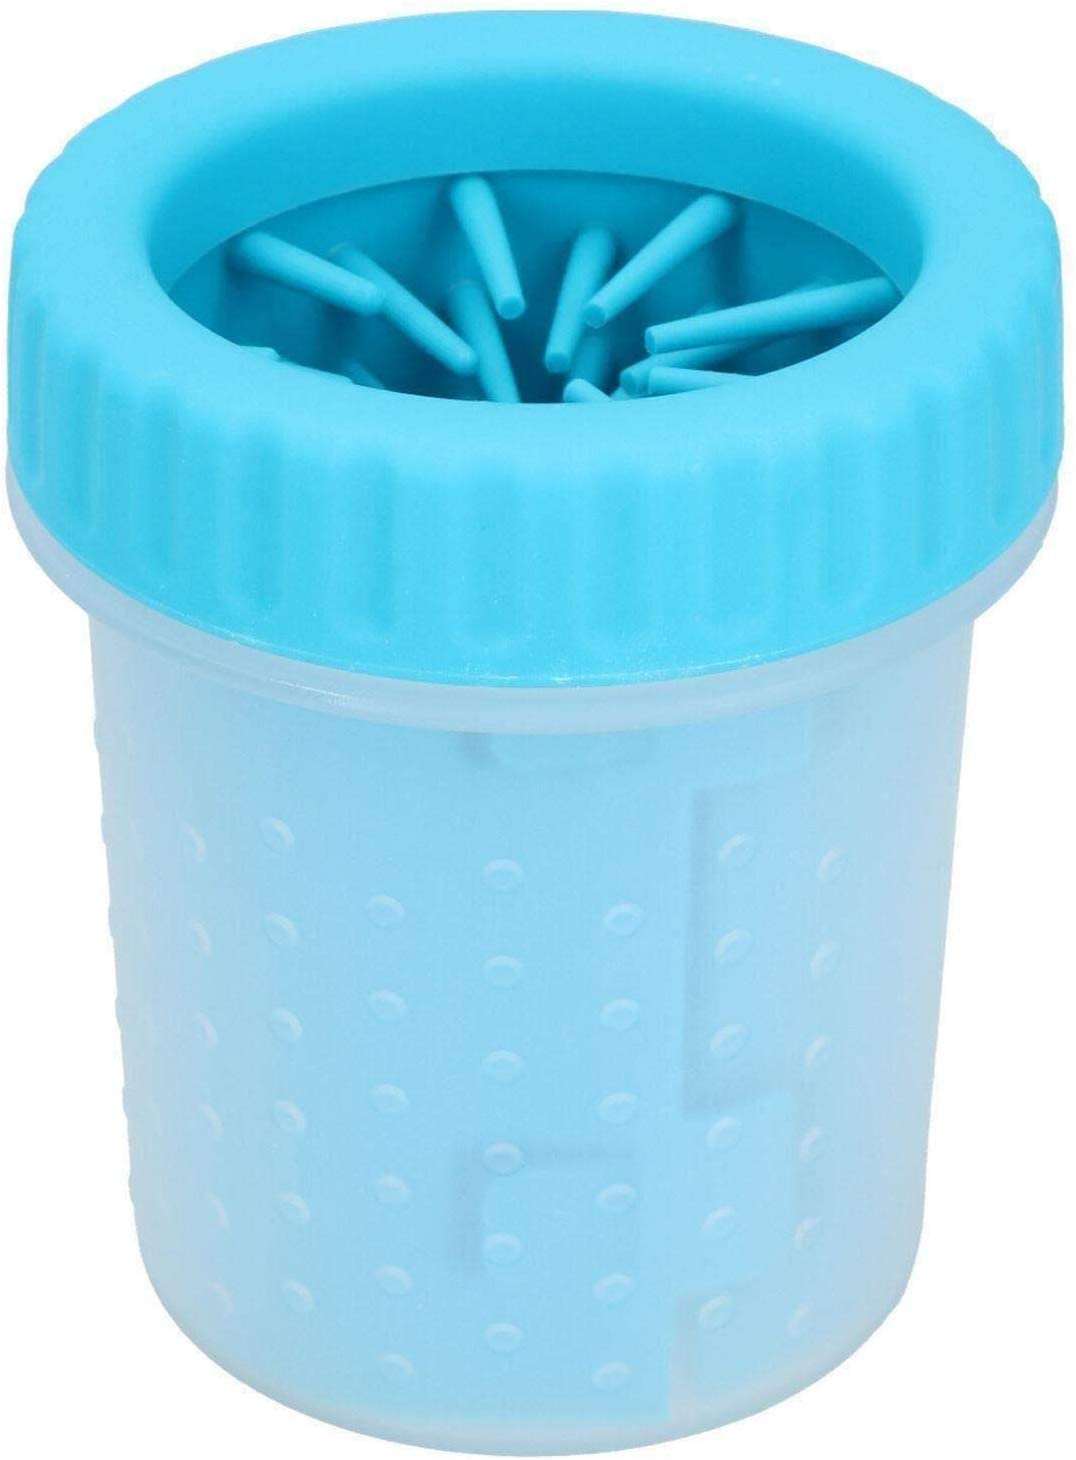 Smarty Pet Portable Dog Paw Cleaner And Washer Cup With Soft Silicone Bristles For Quickly Cleaning Pets Muddy Feet Color May Vary Small Pawzone